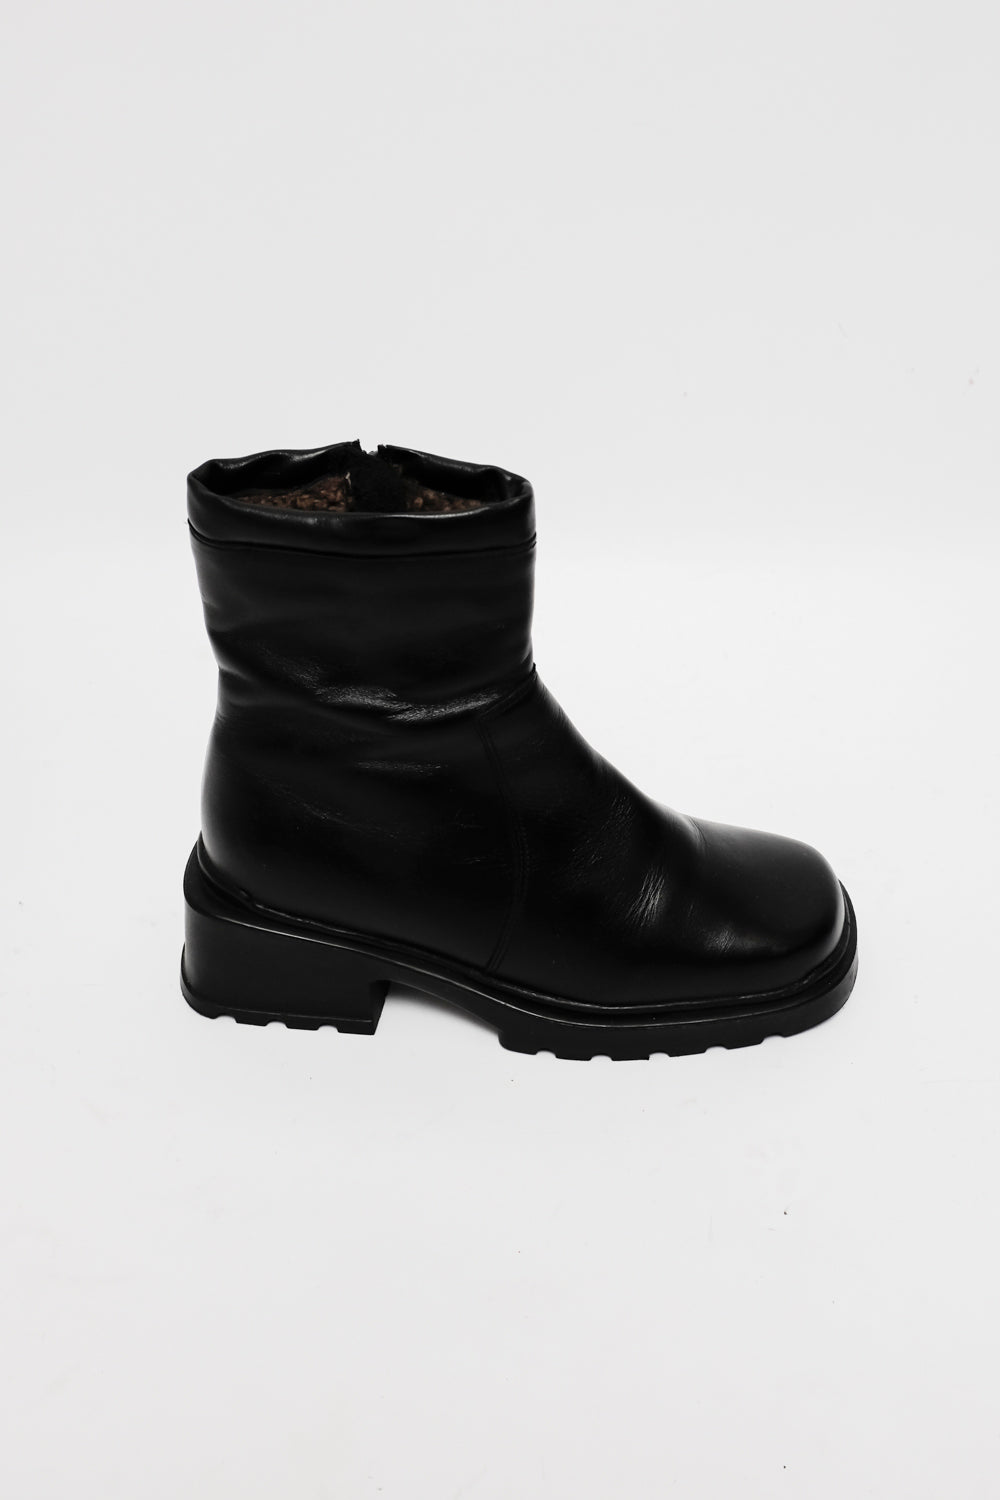 0021_WARM DERBY LEATHER BOOTS 38